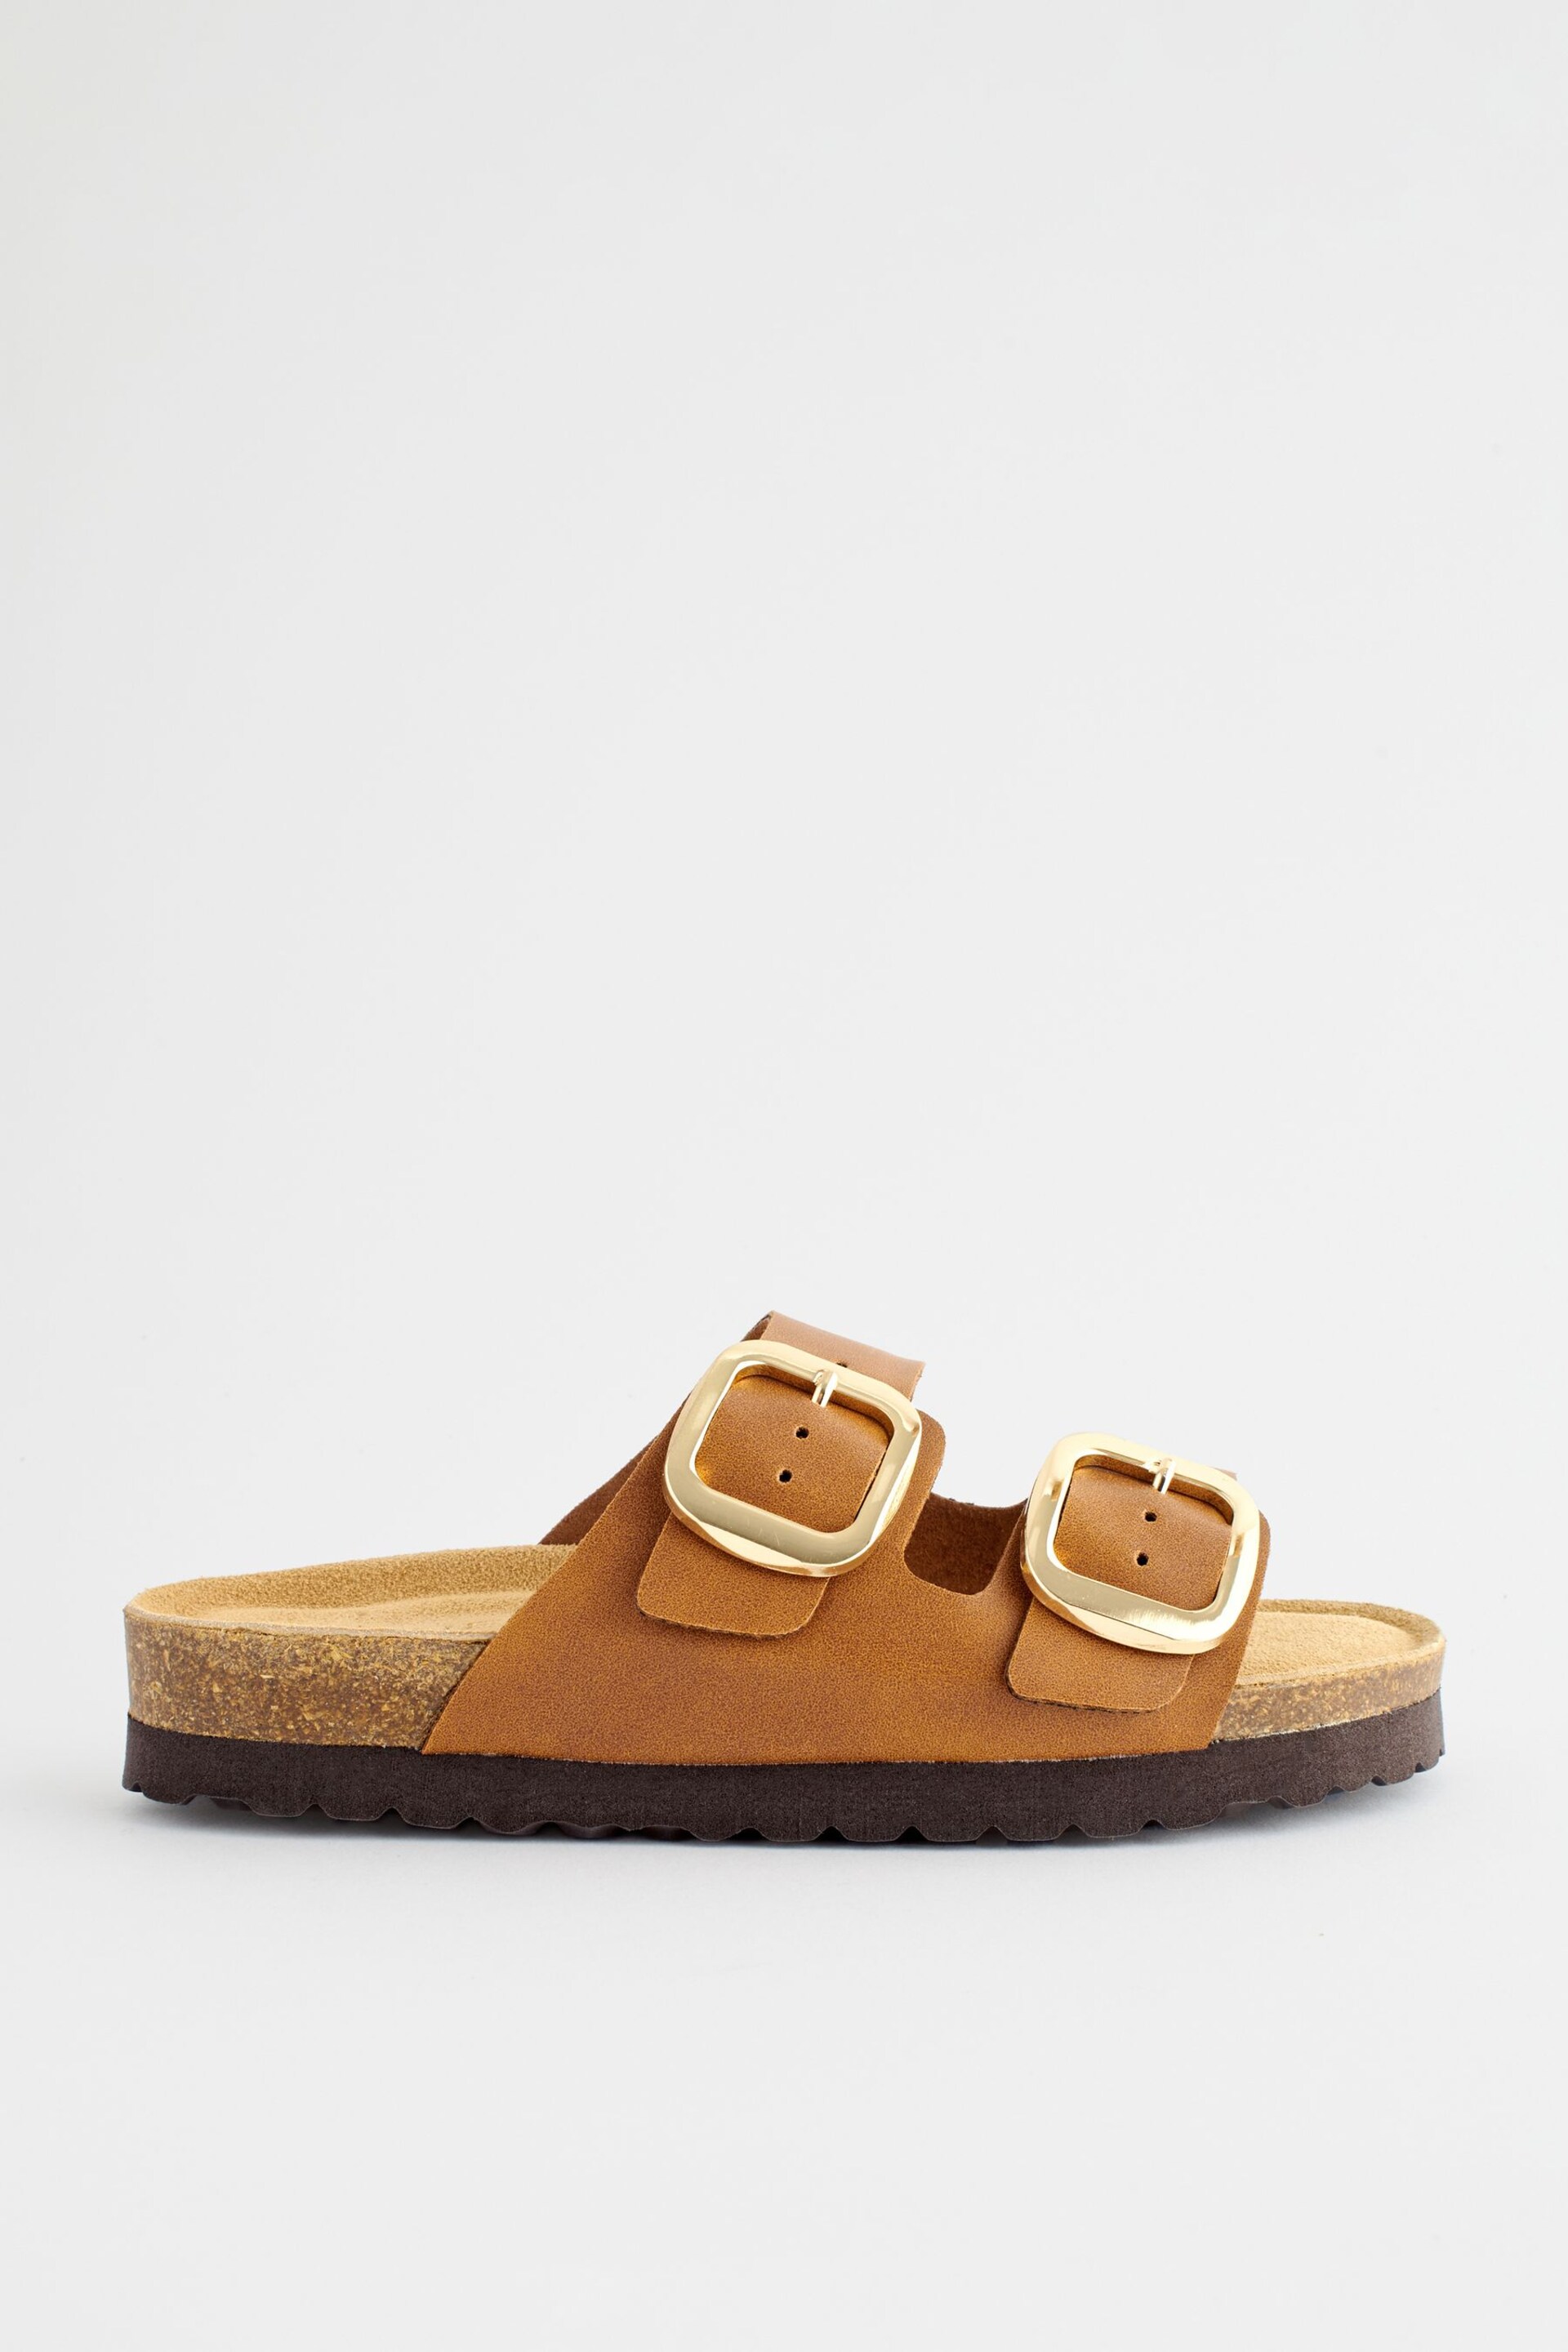 Tan Brown Corkbed Double Strap Sandals - Image 2 of 7